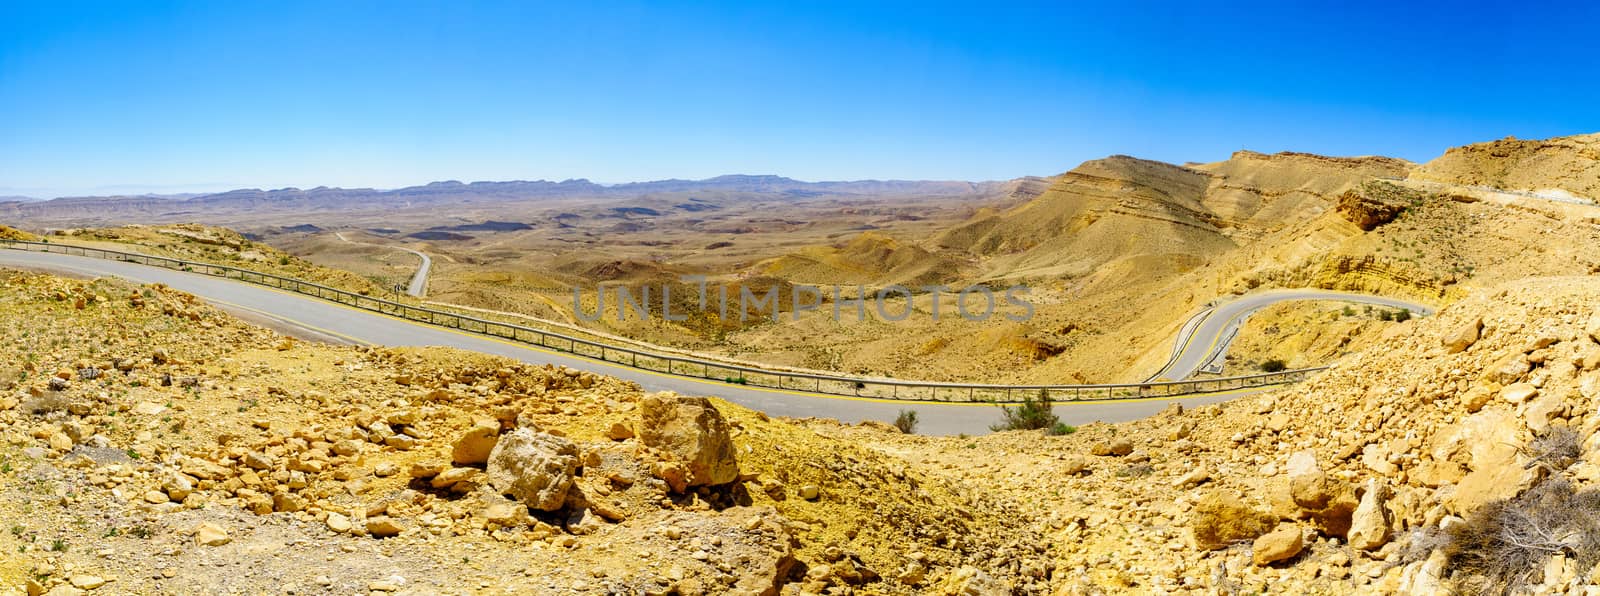 Panoramic landscape and winding road 225 in HaMakhtesh HaGadol (the big crater). It is a geological erosional landform in the Negev desert, Southern Israel